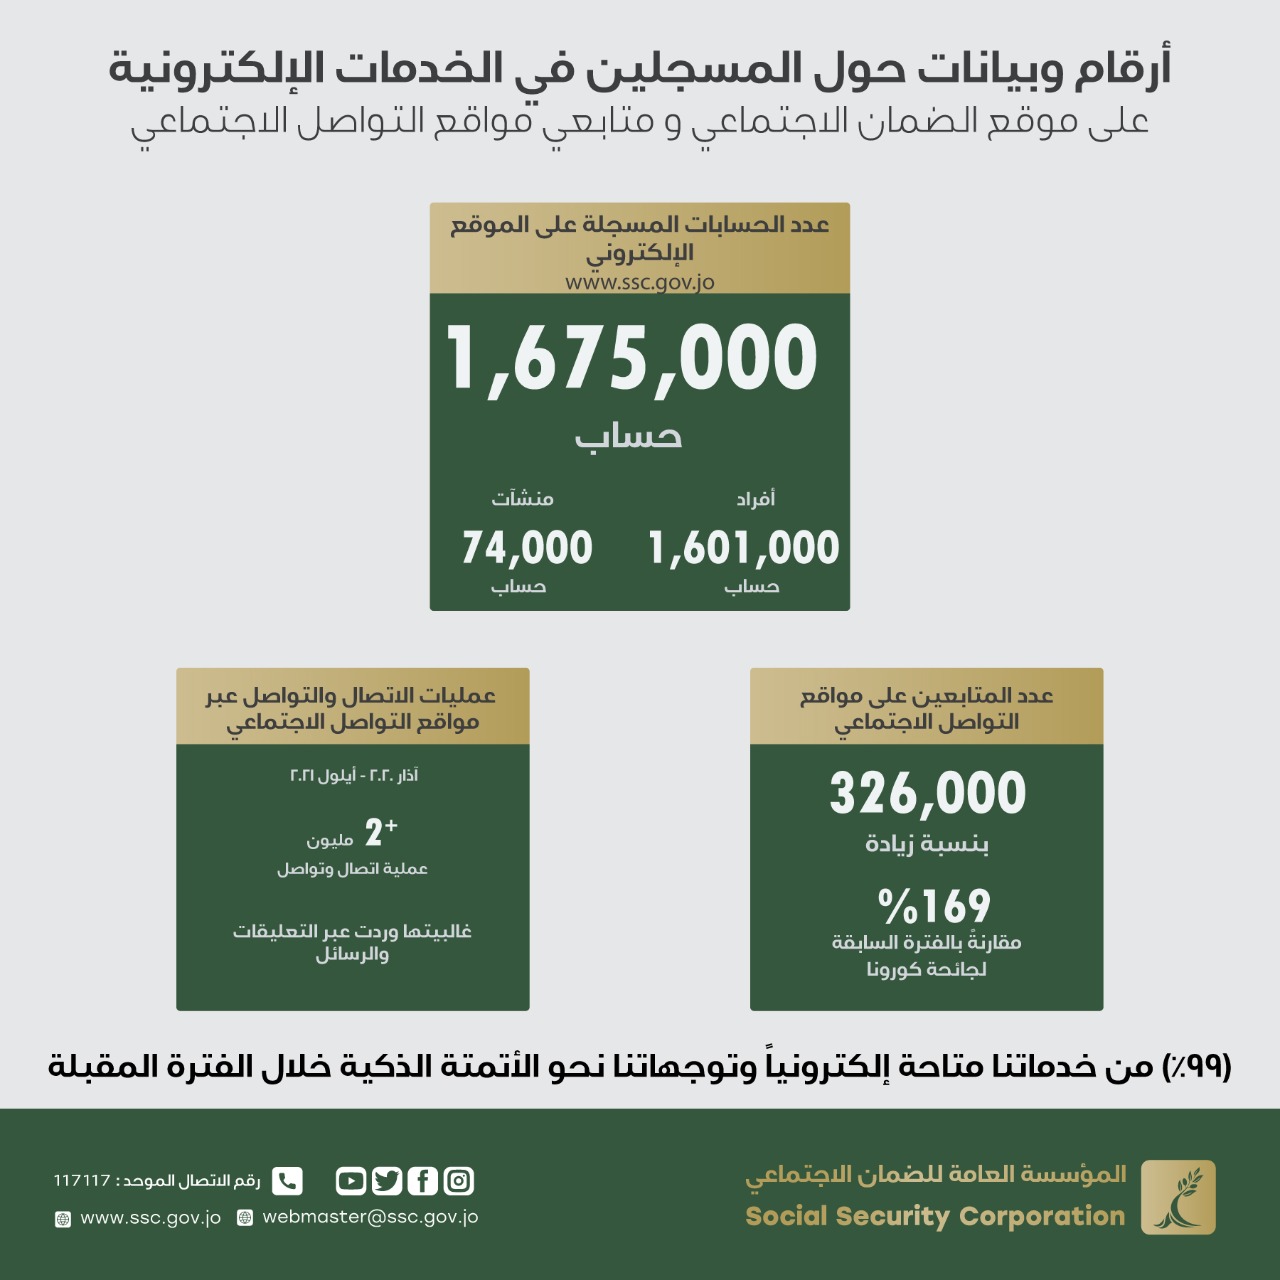 Social Security: One million (700,000) individuals and businesses are registered in electronic services-image